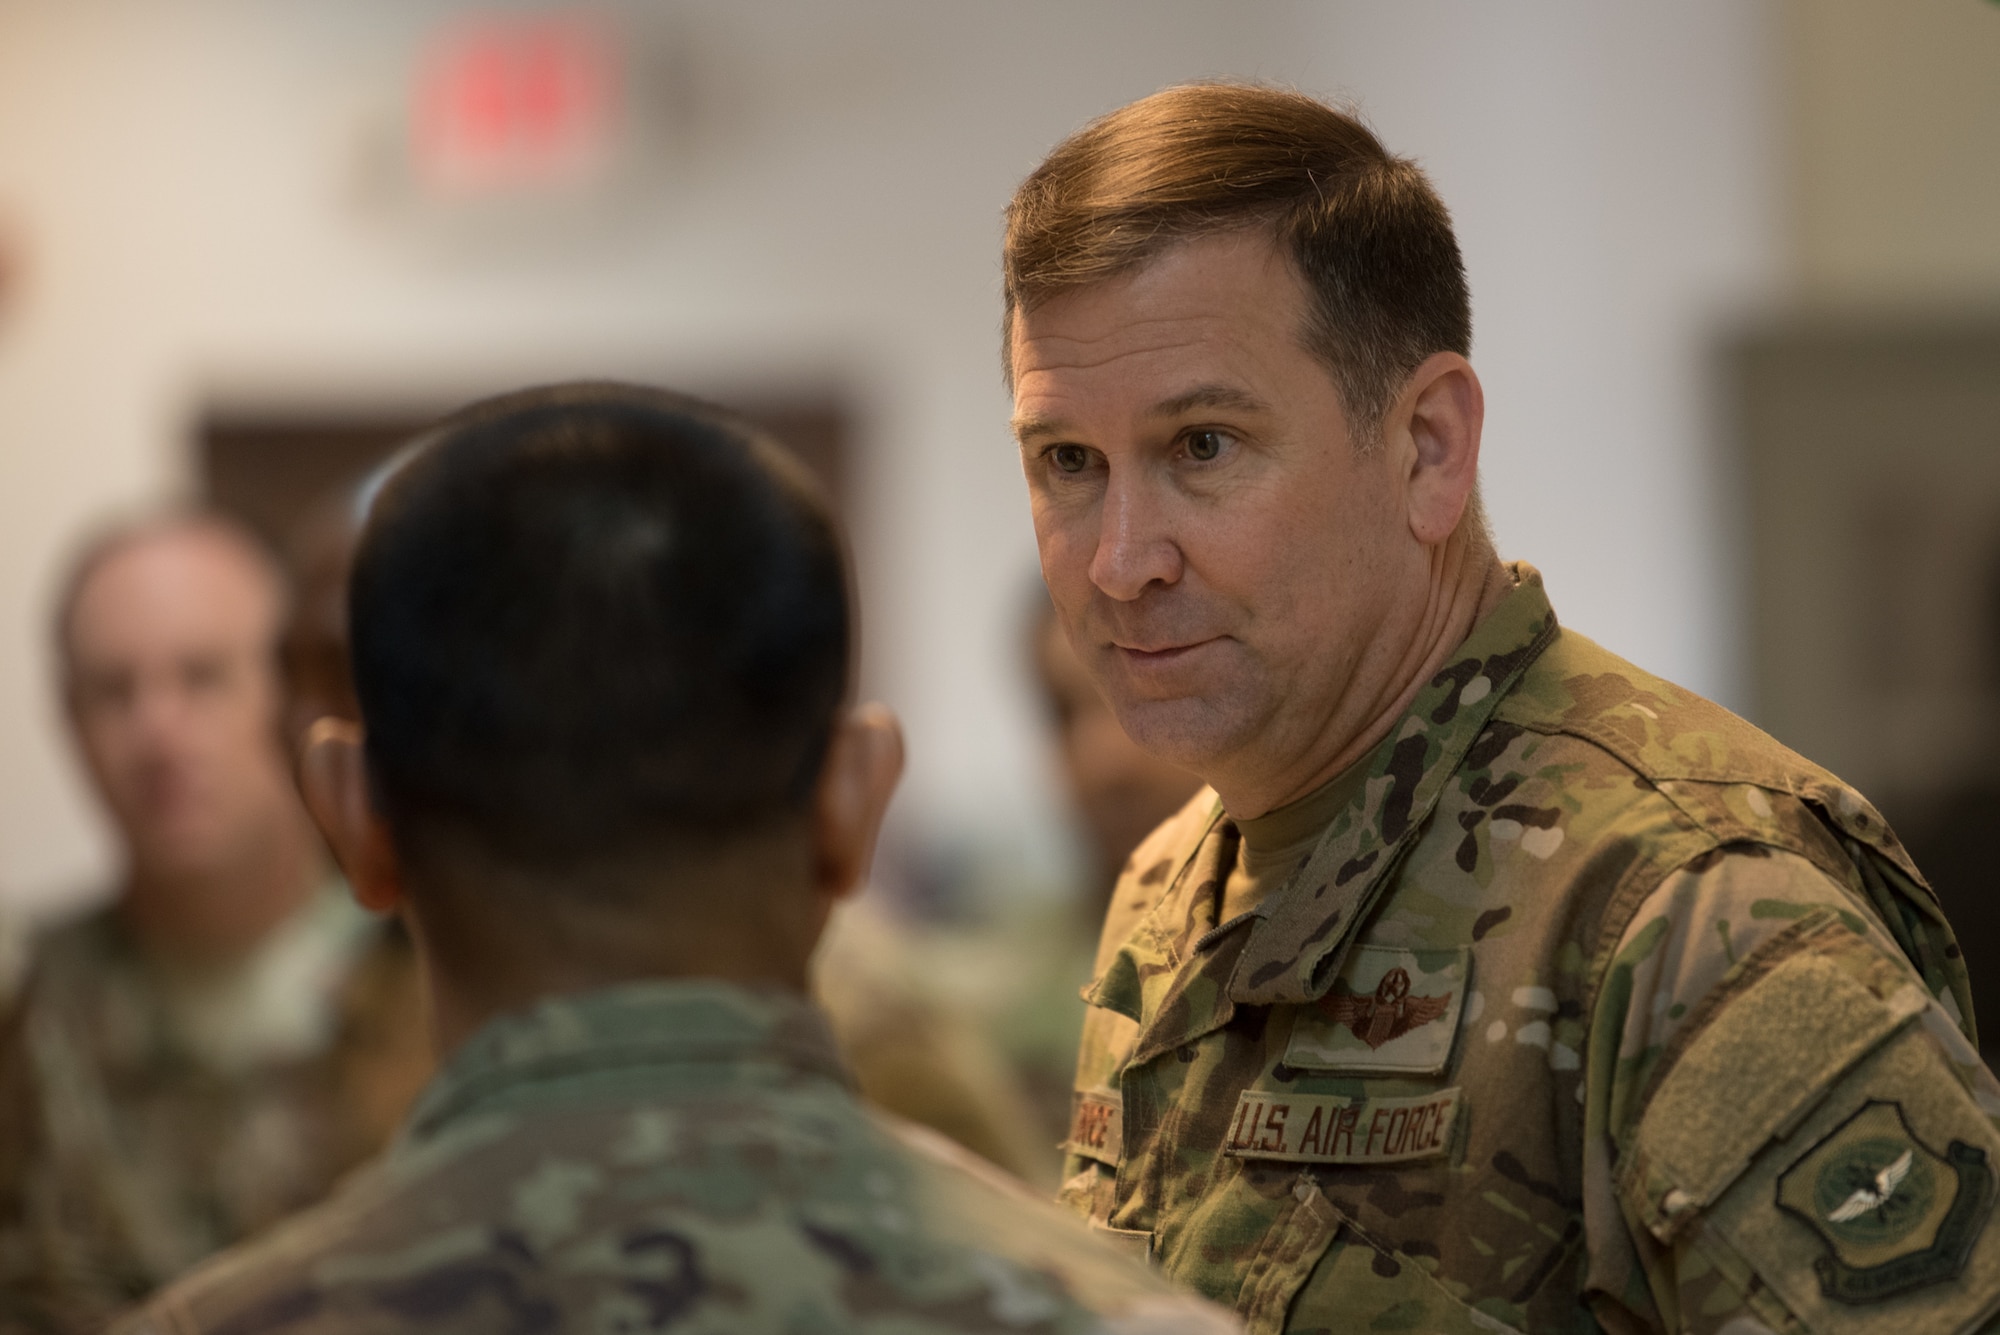 Maj. Gen. Christopher J. Bence, commander of the U.S. Air Force Expeditionary Center, tours the facilities of the 8th Expeditionary Air Mobility Squadron at Al Udeid Air Base, Qatar, March 4, 2018. The visit, part of a nine-day tour of various components of the 521st Air Mobility Operations Wing, provided Bence an opportunity to see the day-to-day operations of the 8 EAMS, observe how they complete their mission, and commemorate a few selected Airmen for their outstanding performance. (U.S. Air Force photo by Staff Sgt. Joshua Horton)